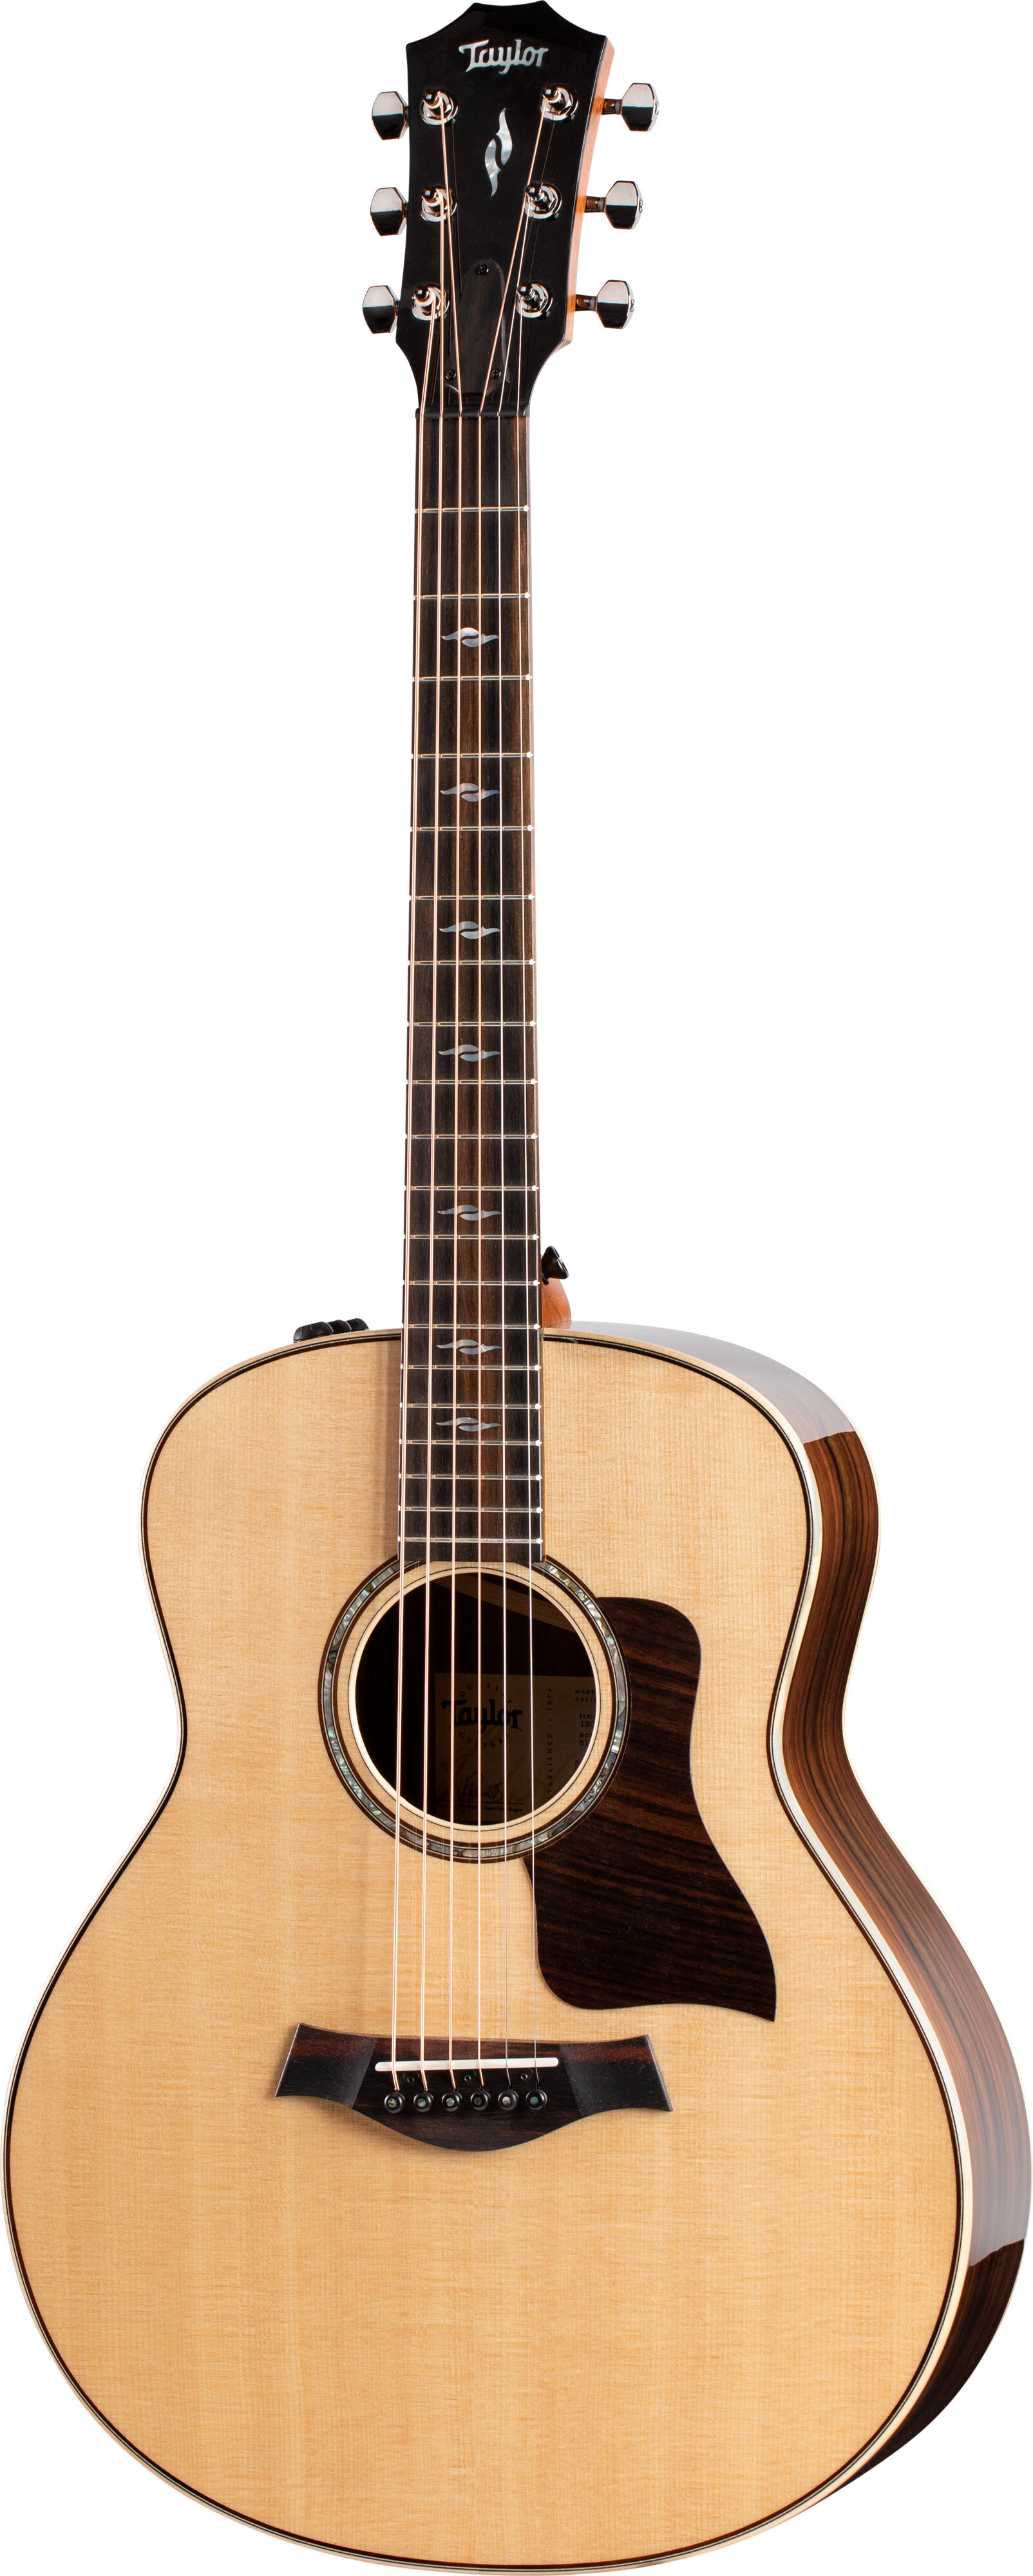 Taylor GT 811e Grand Theater Acoustic Electric -  Taylor Guitars